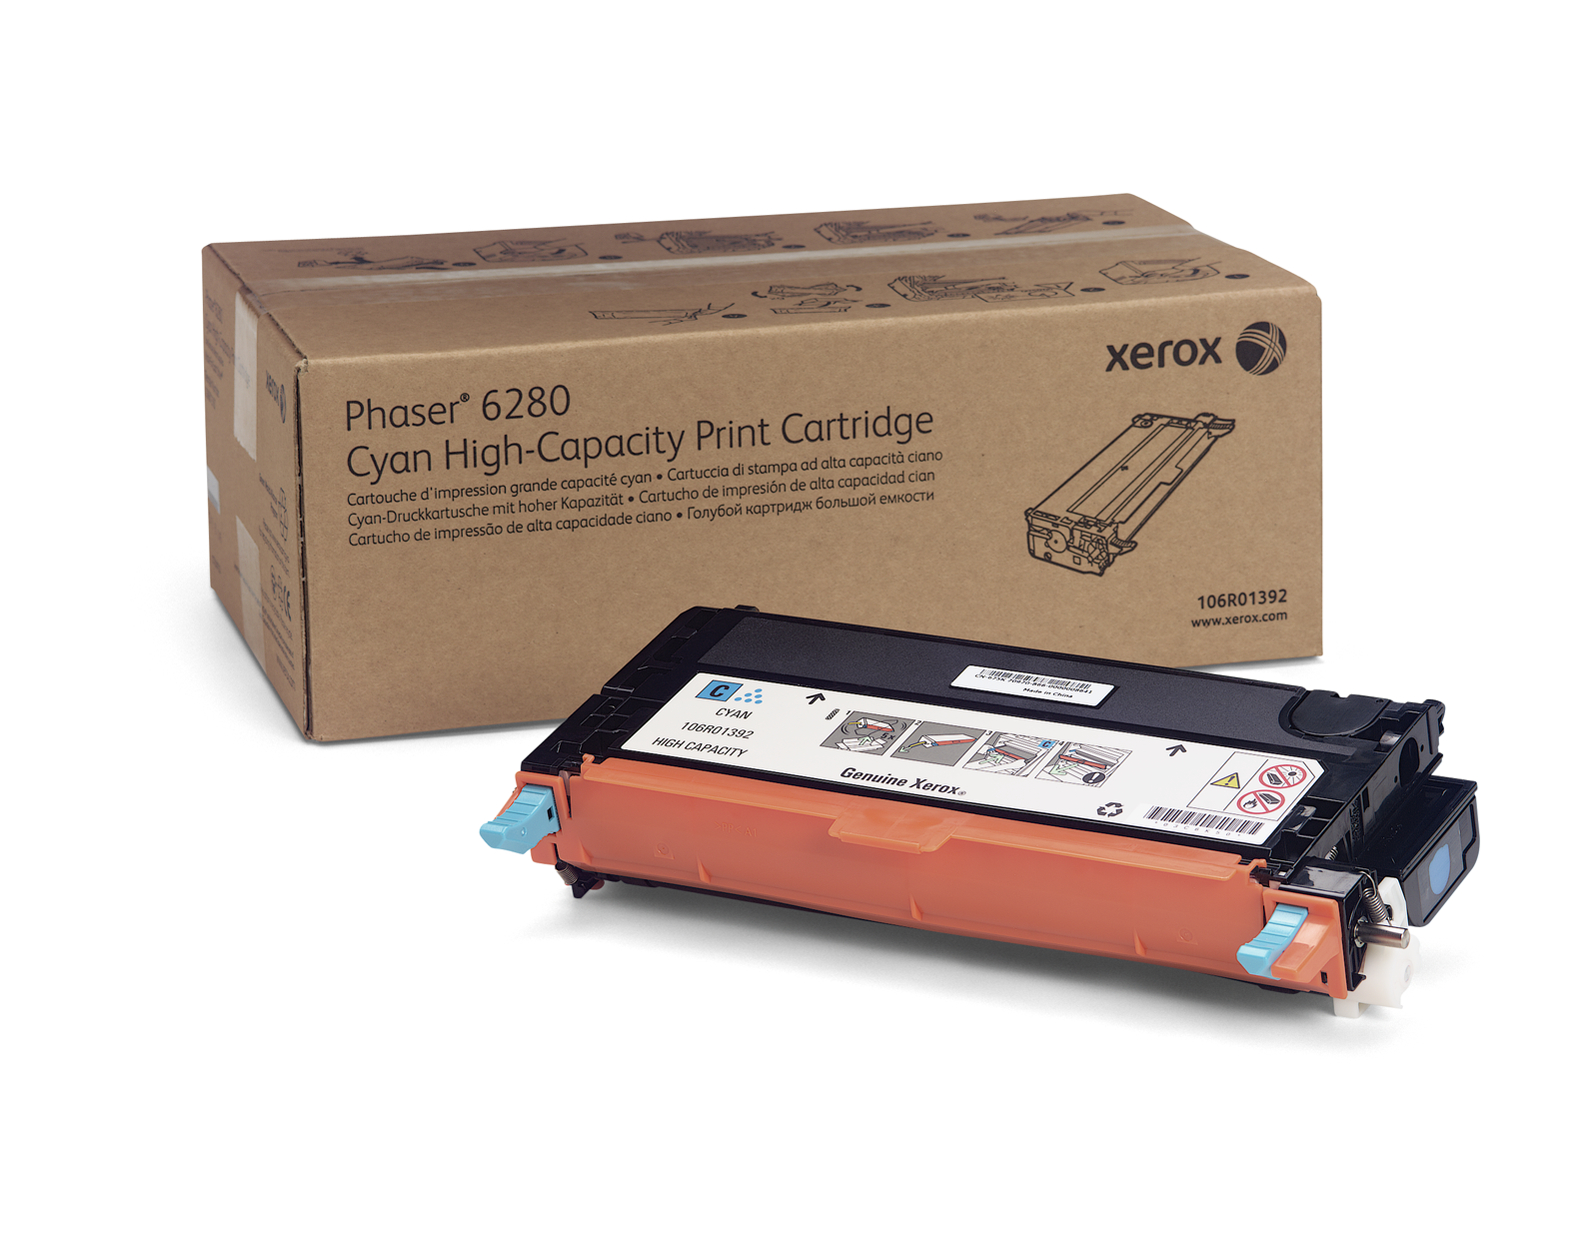 94 REFRESH CARTRIDGES 106R01392 95 TONER COMPATIBLE WITH XEROX PRINTERS 93 